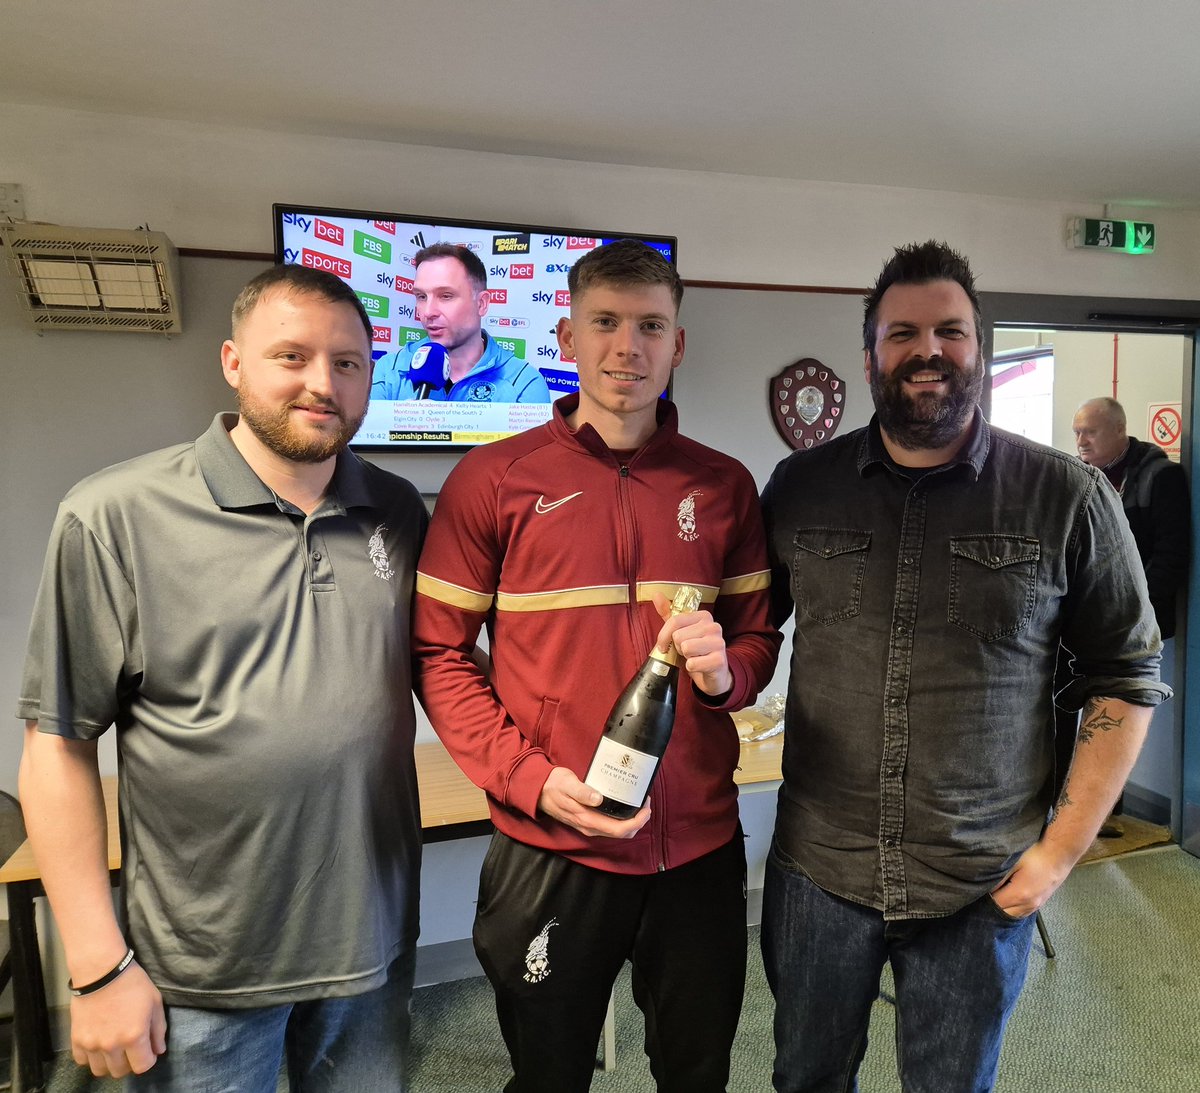 SATURDAY'S MAN OF THE MATCH @Guymcgarry3 received his third successive MotM award as the selection as our star man yesterday of both LEMAC & East Lothian Glass & Glazing Ltd's sponsors parties - Guy's pictured here with James Elliot of LEMAC and Chris Marr of @ELGLASS1